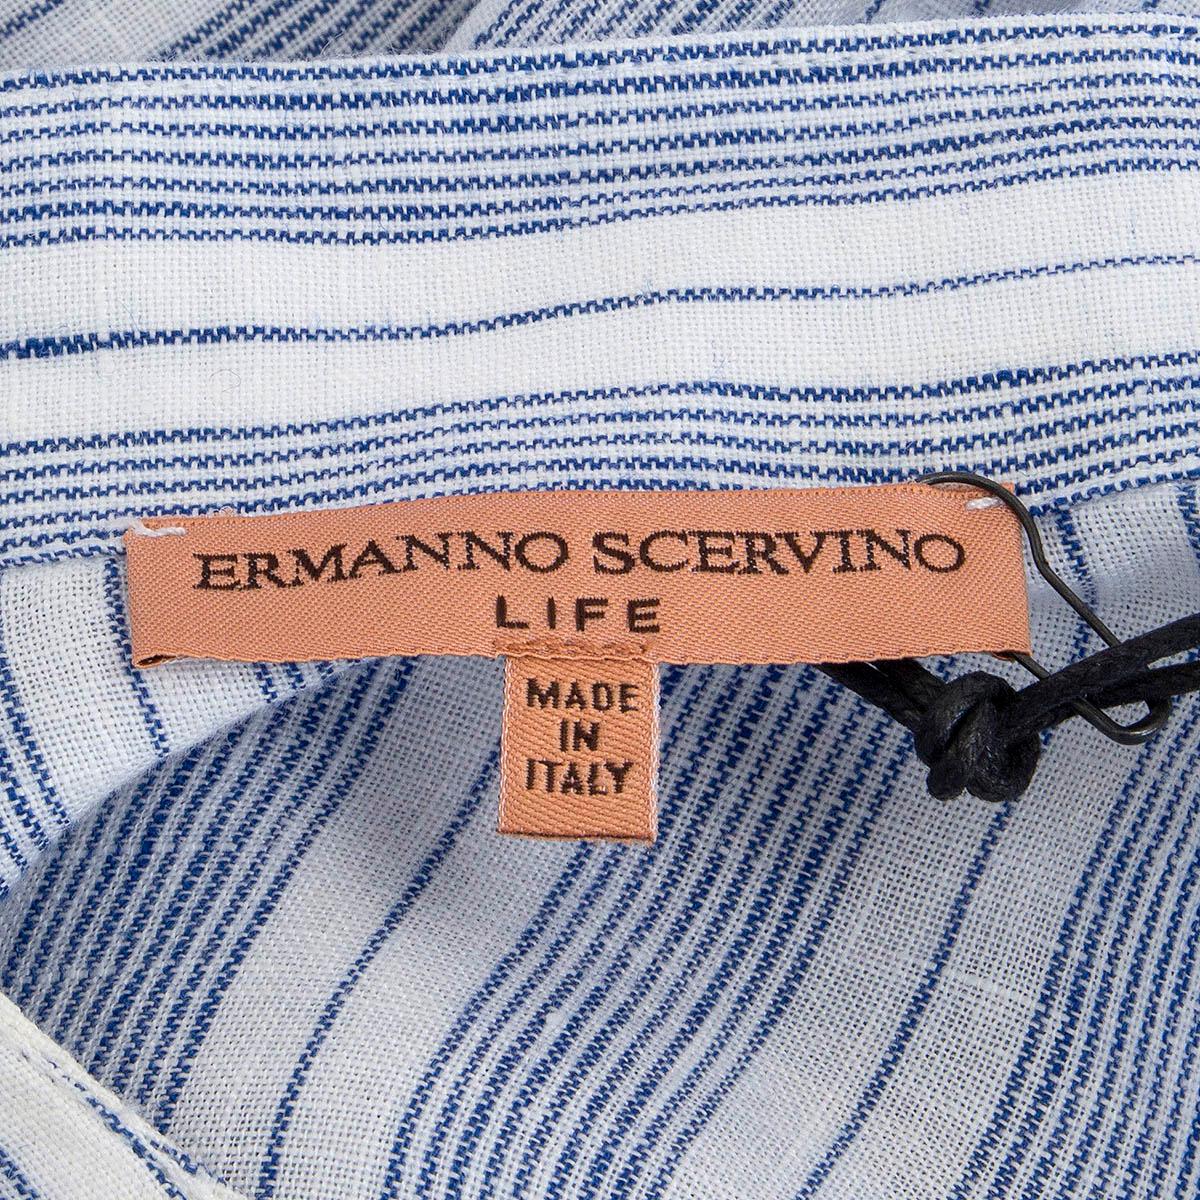 ERMANNO SCERVINO blue & white linen EMBROIDERED LIFE SHIRT Dress 40 S In Excellent Condition For Sale In Zürich, CH